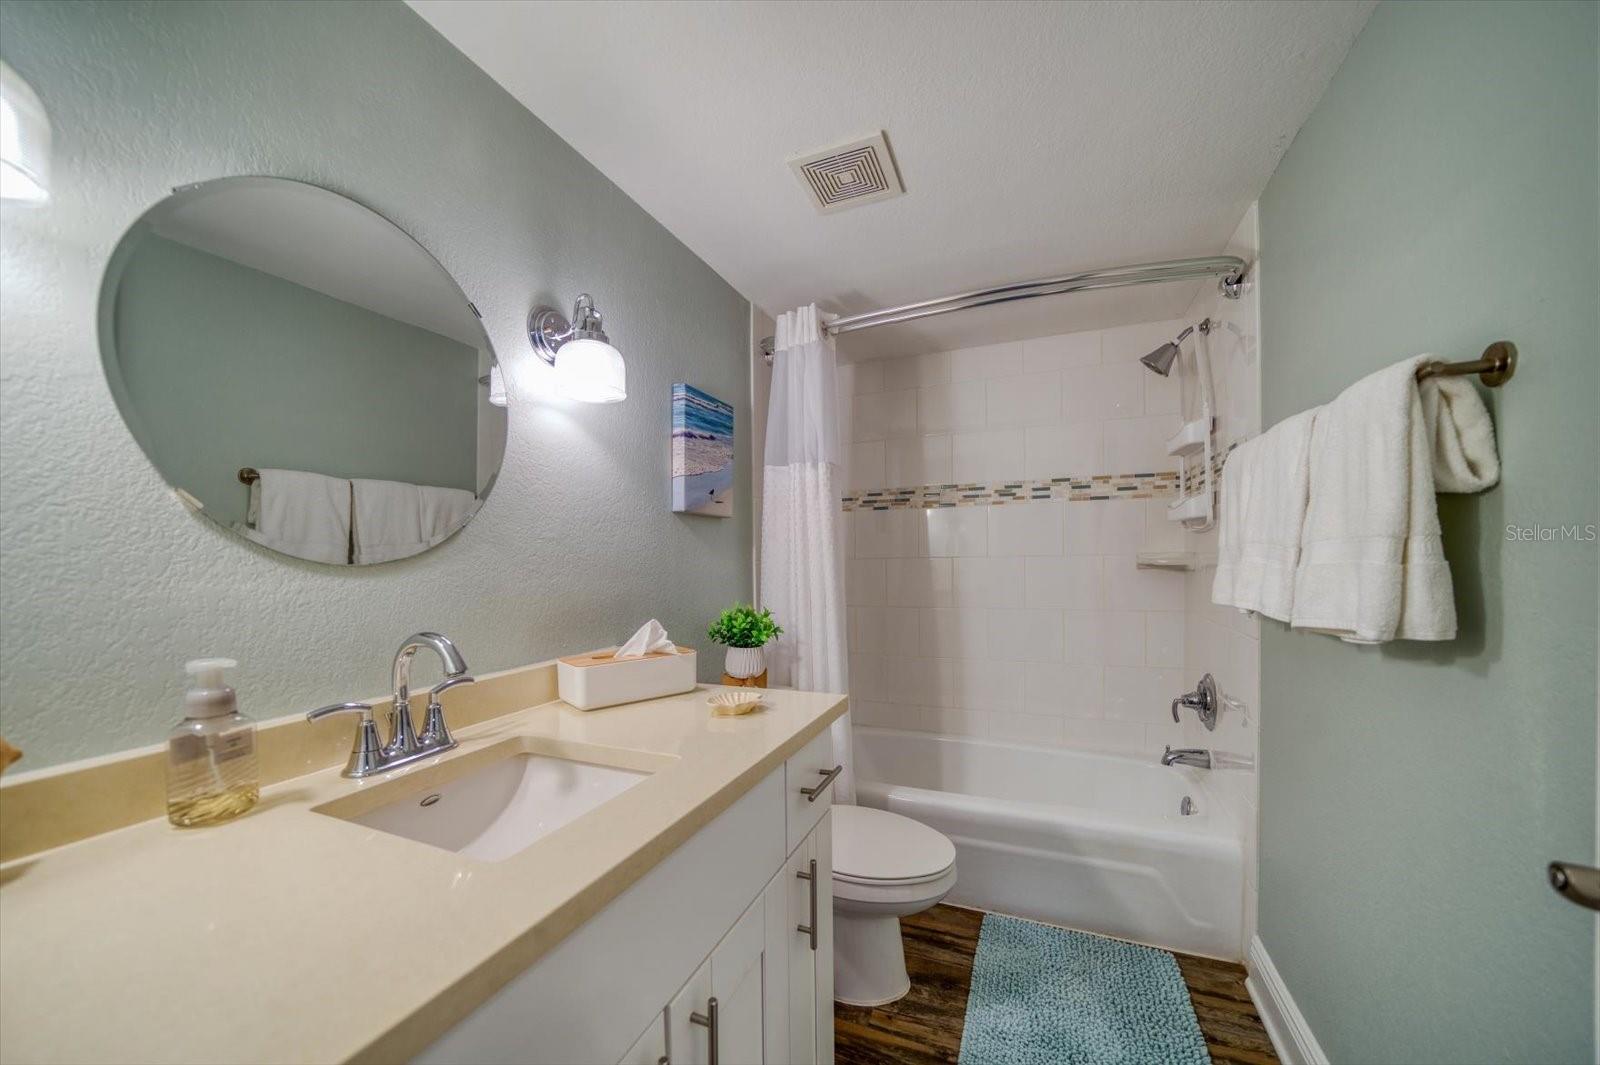 Updated main bathroom with tub/shower combo.